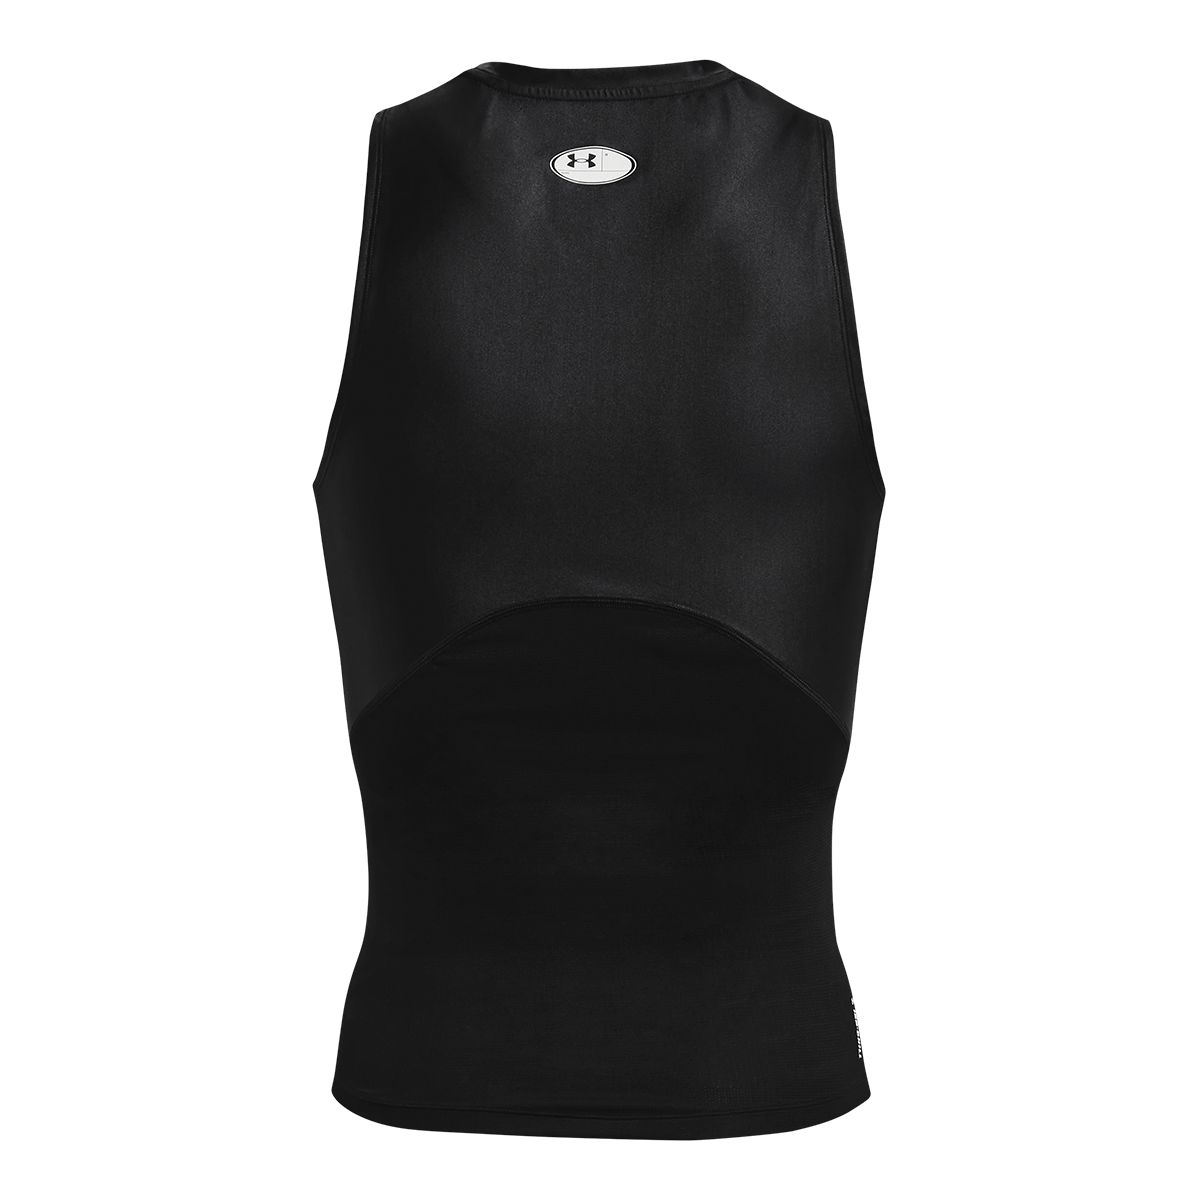 Under Armour Iso-Chill Compression Tank Black 1365225-001 at